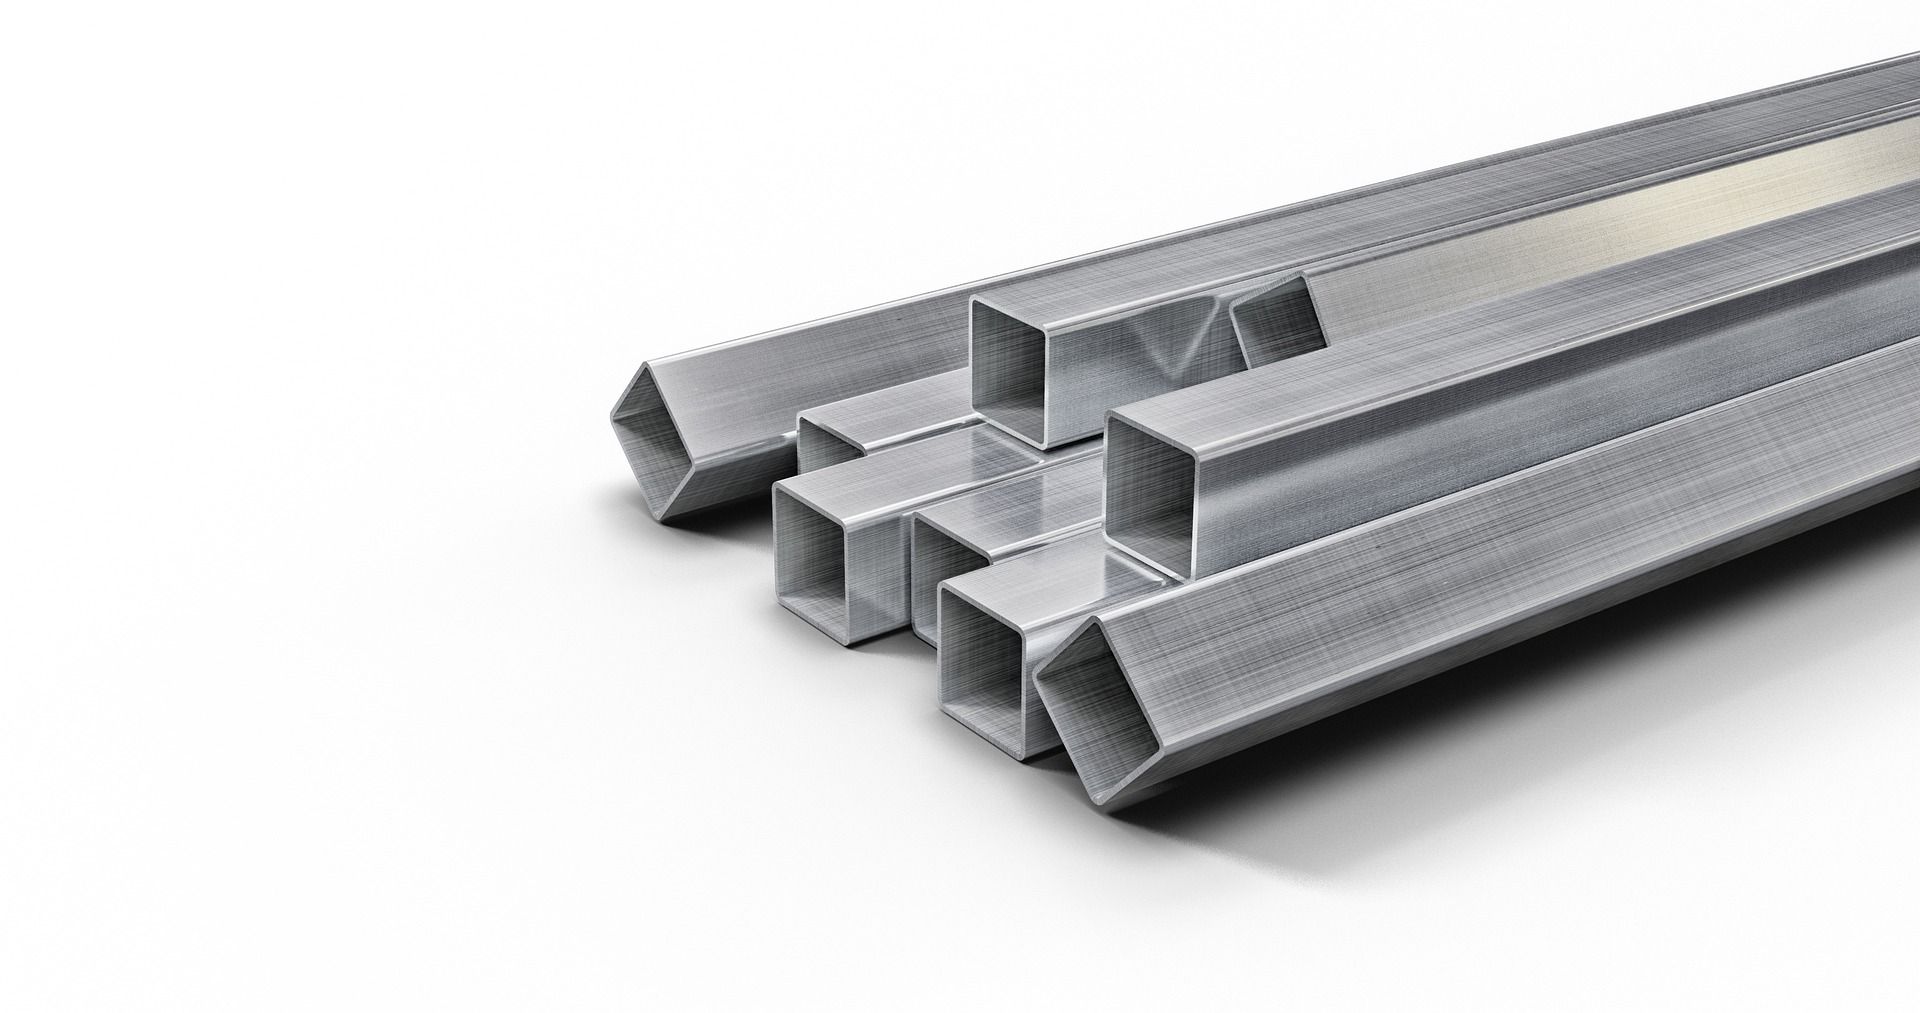 How to choose the grade of stainless steel?